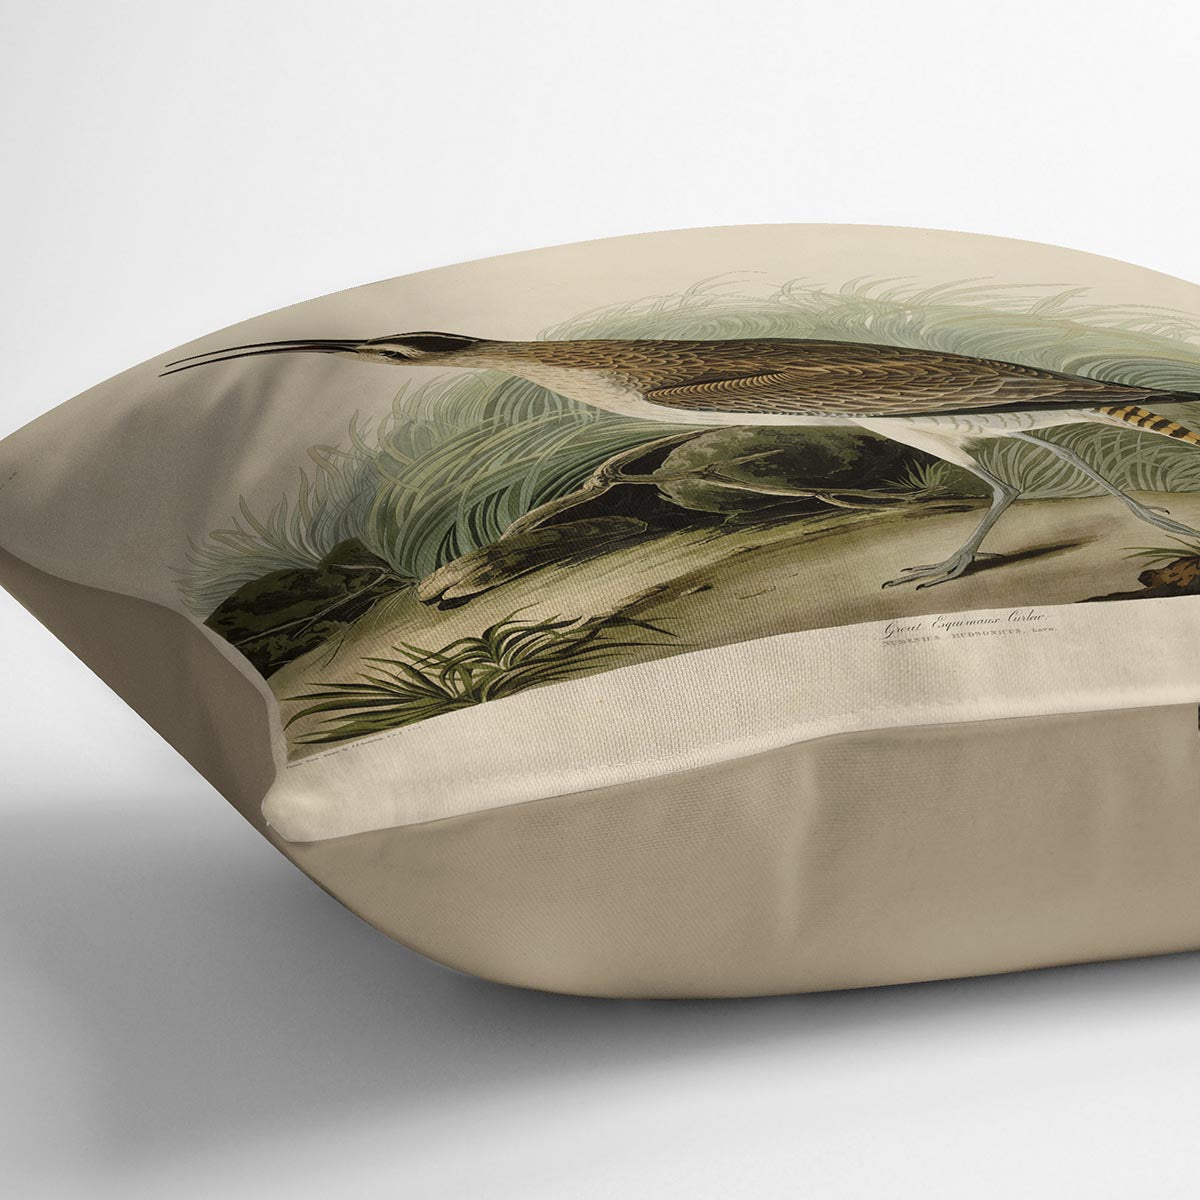 Great Esquimaux Curlew by Audubon Cushion